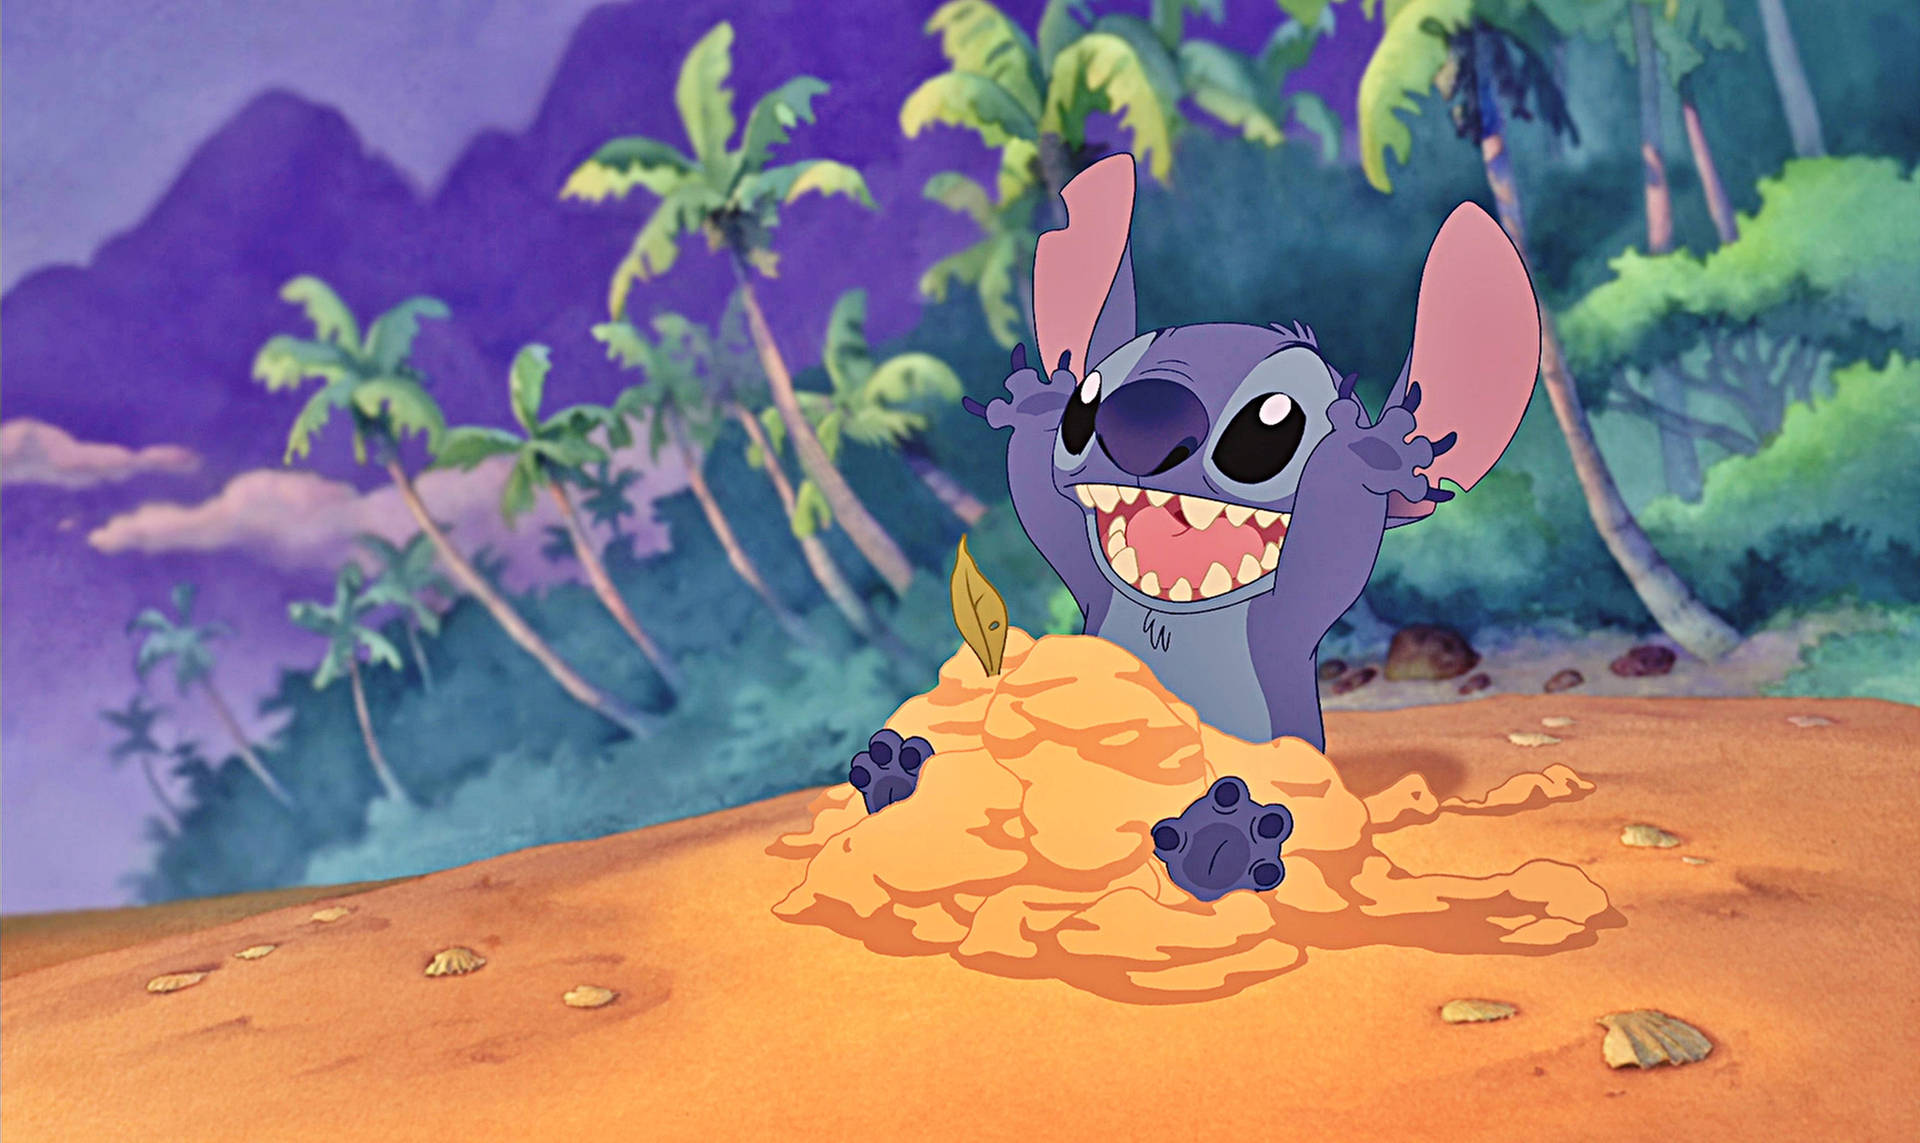 Stitch playing in the sand on the beach wallpaper.